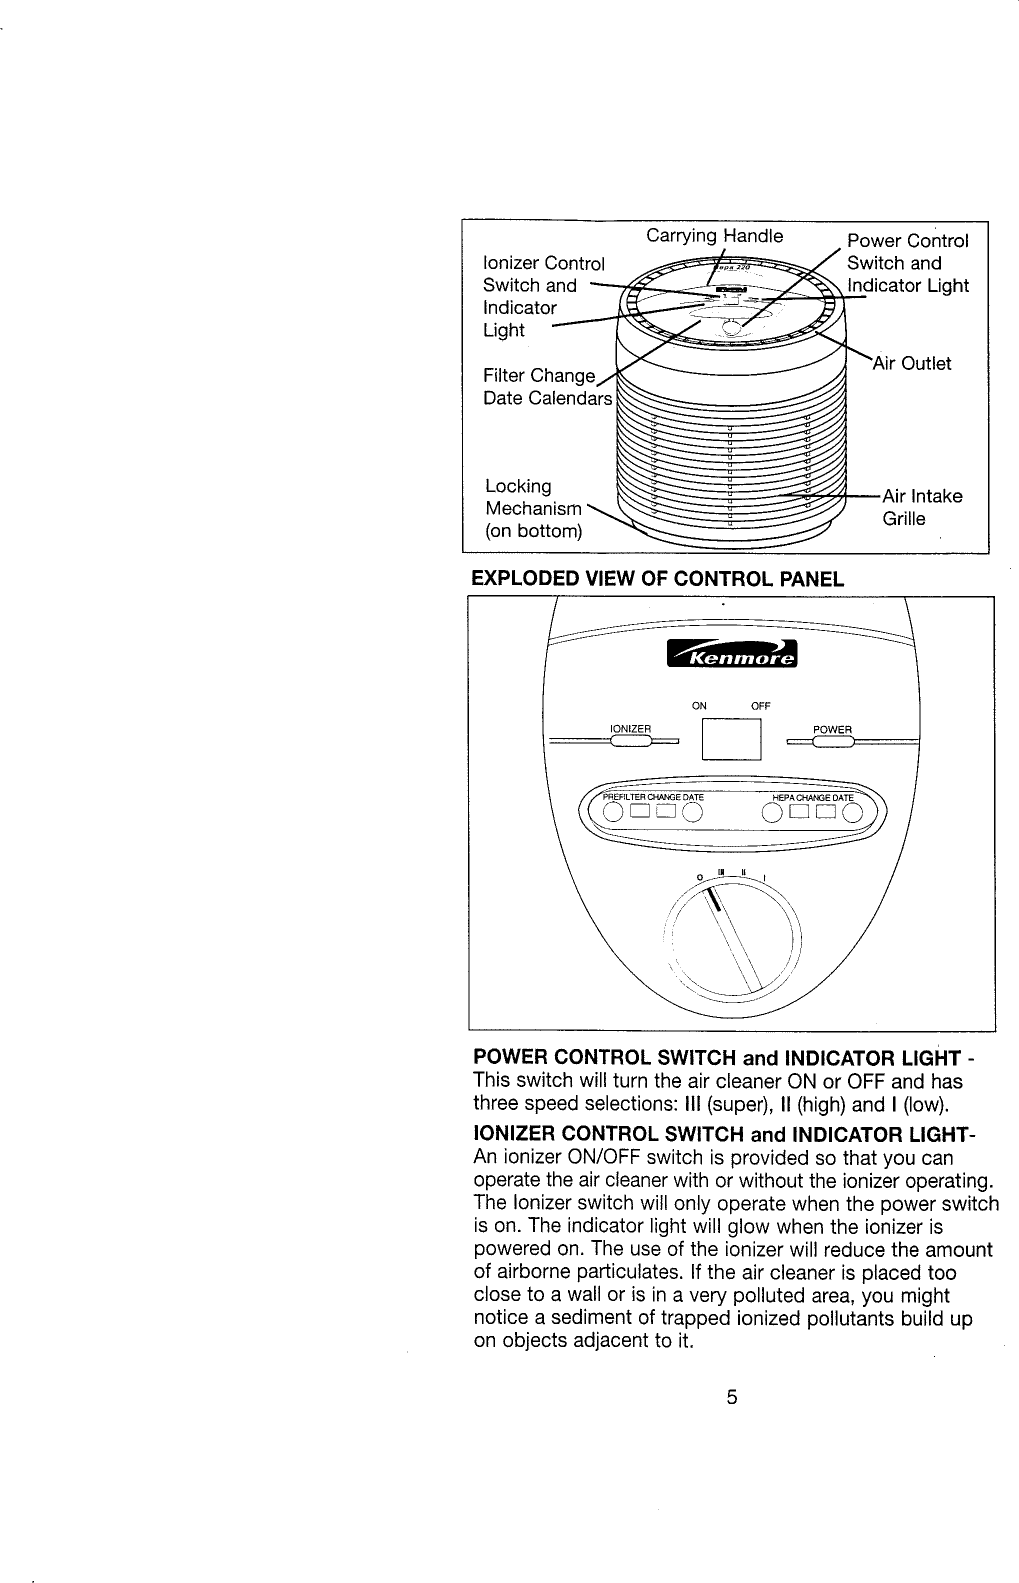 Page 5 of 11 - Kenmore 43783236 User Manual  AIR CLEANER - Manuals And Guides L0810462